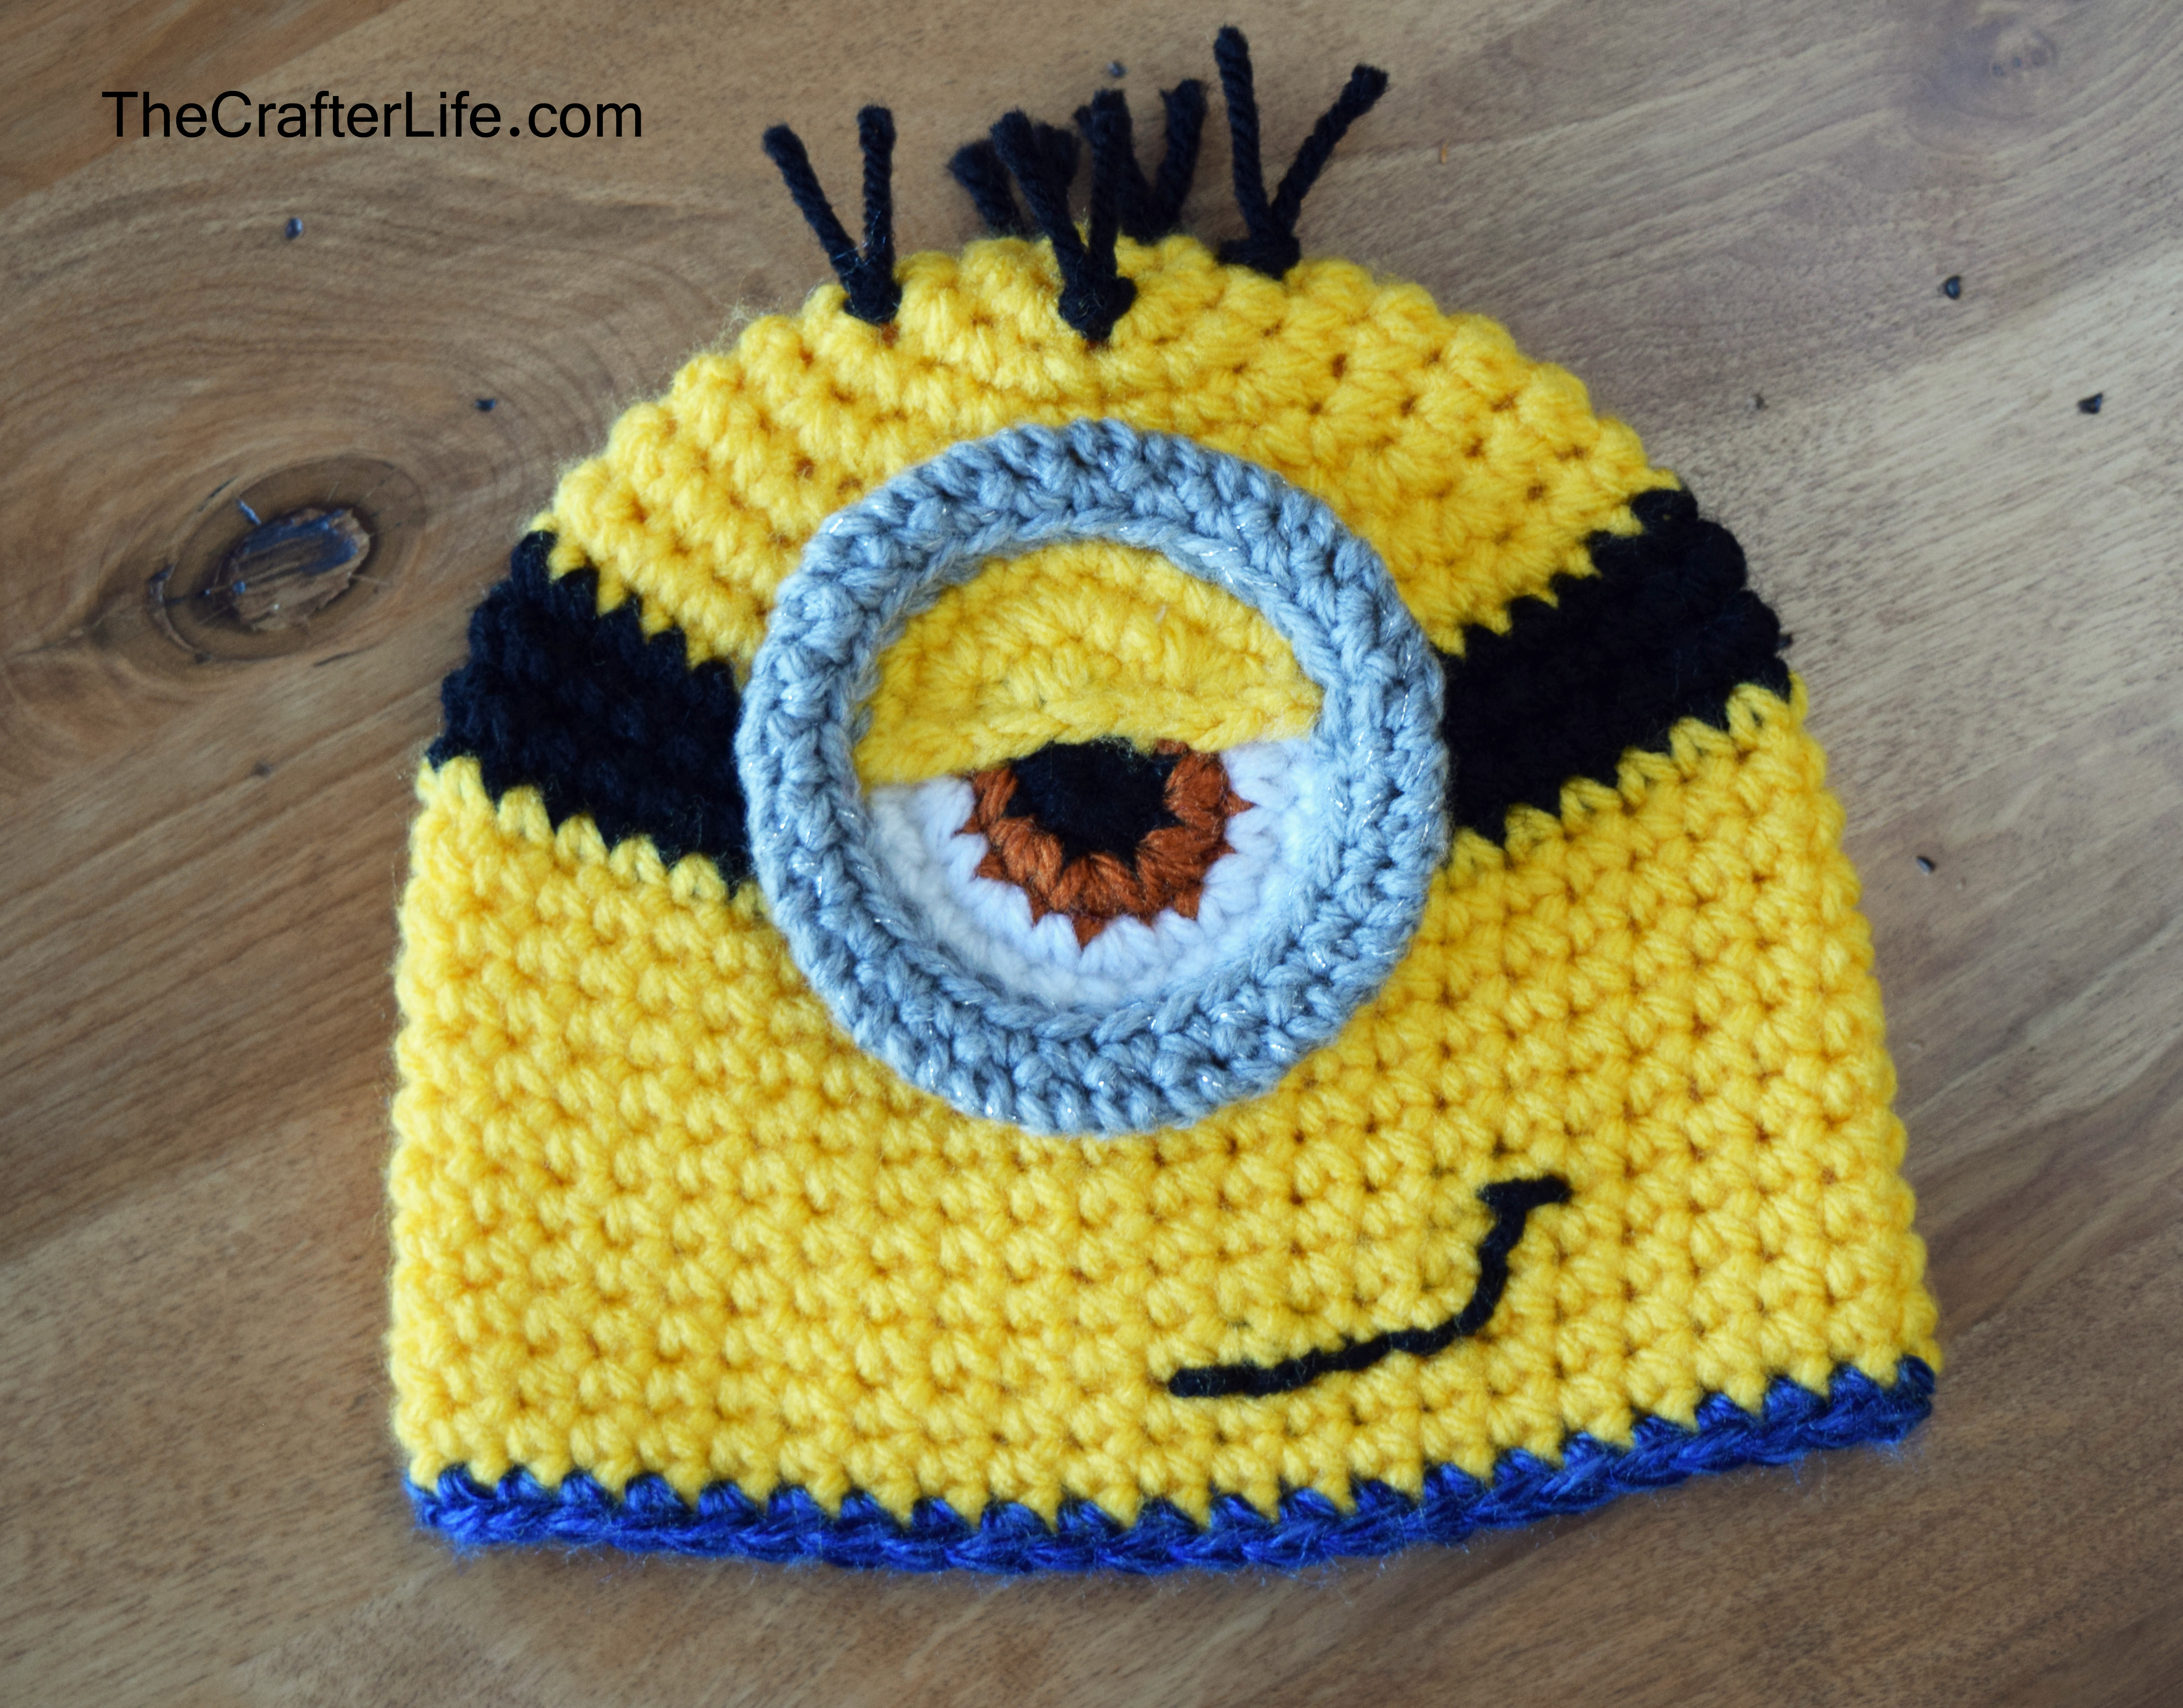 Knitting Patterns For Minion Hats Hat And Bib Set The Crafter Life